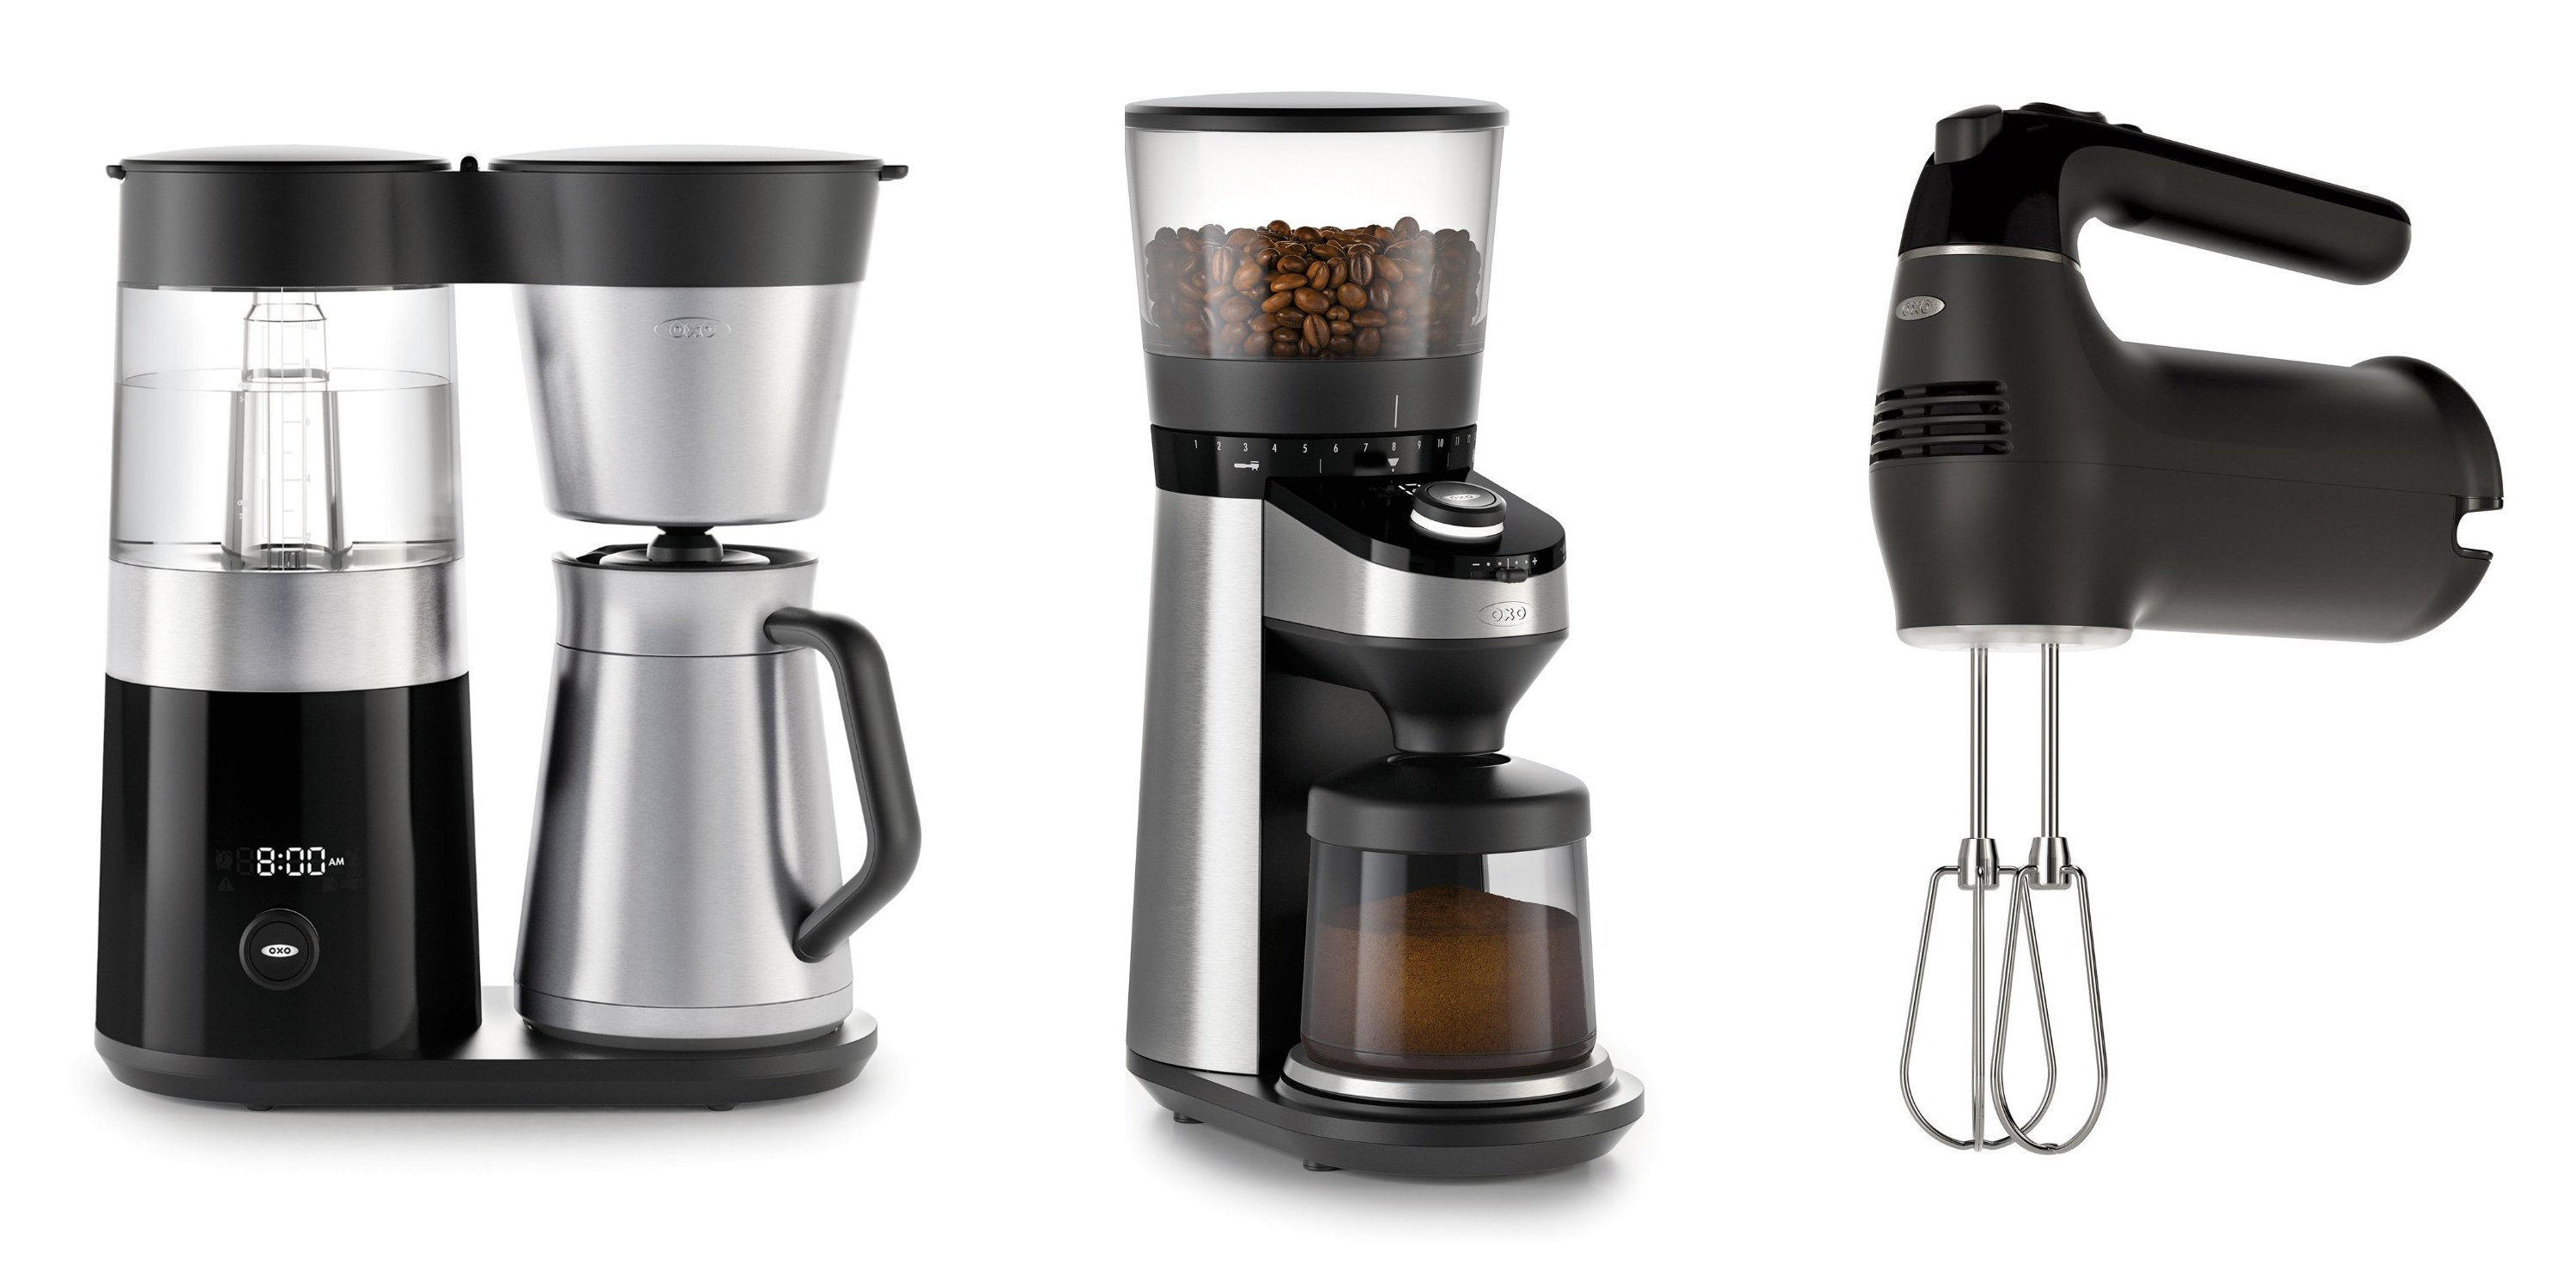 OXO Small Appliances 20% Off: 9-Cup Coffee Maker $160, Burr Coffee Grinder  $160, Hand Mixer $64, more